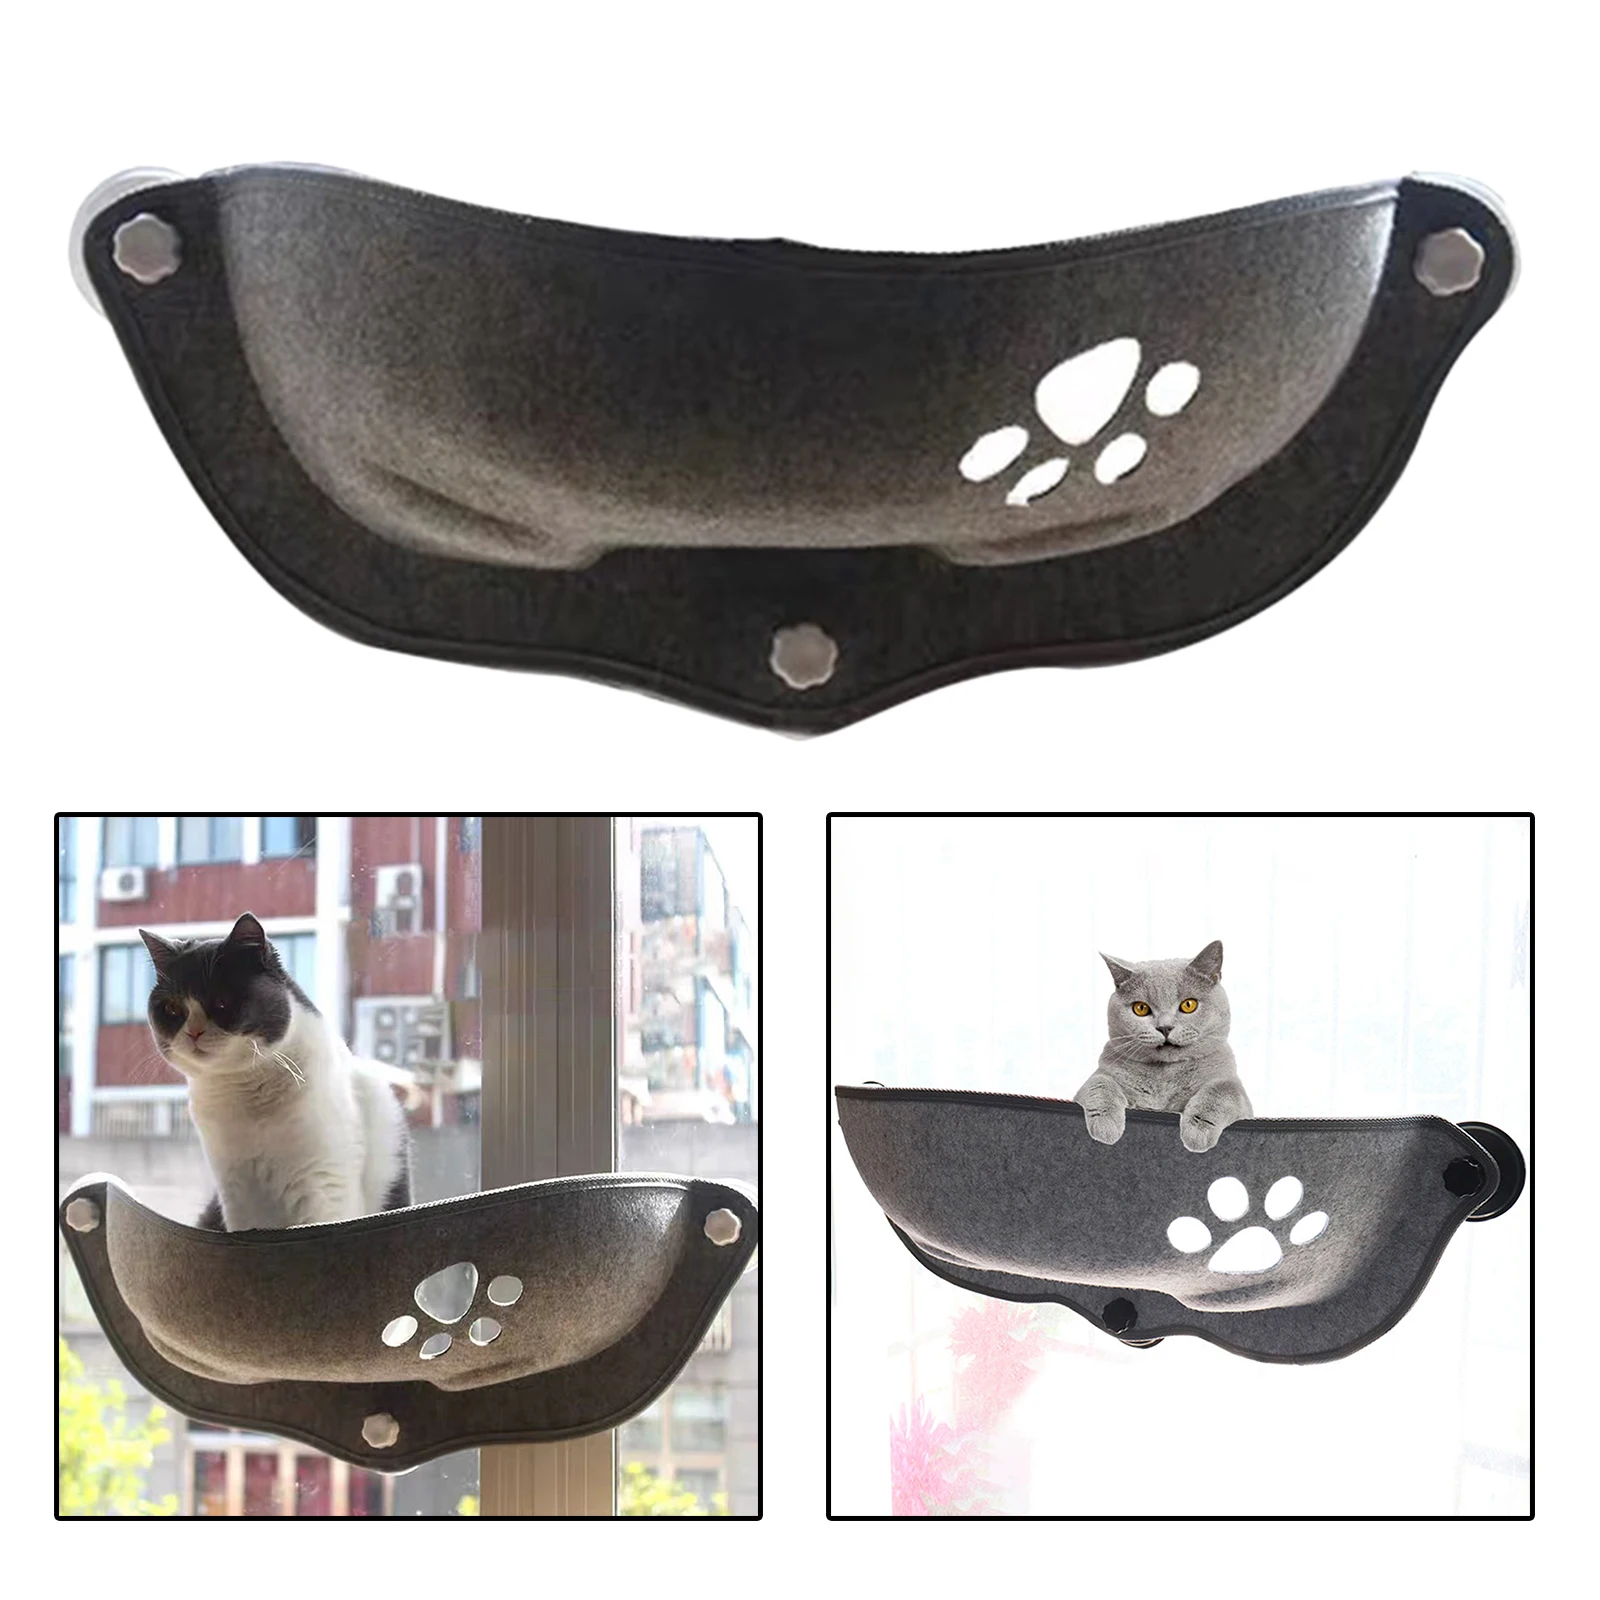 Window Bed Hammock Kitty Sill Sunny Seat for Indoor Car, Pet Cat Rest Sleeping Bed Sunbath Seat Holds Up to 33 lbs Safety Seat